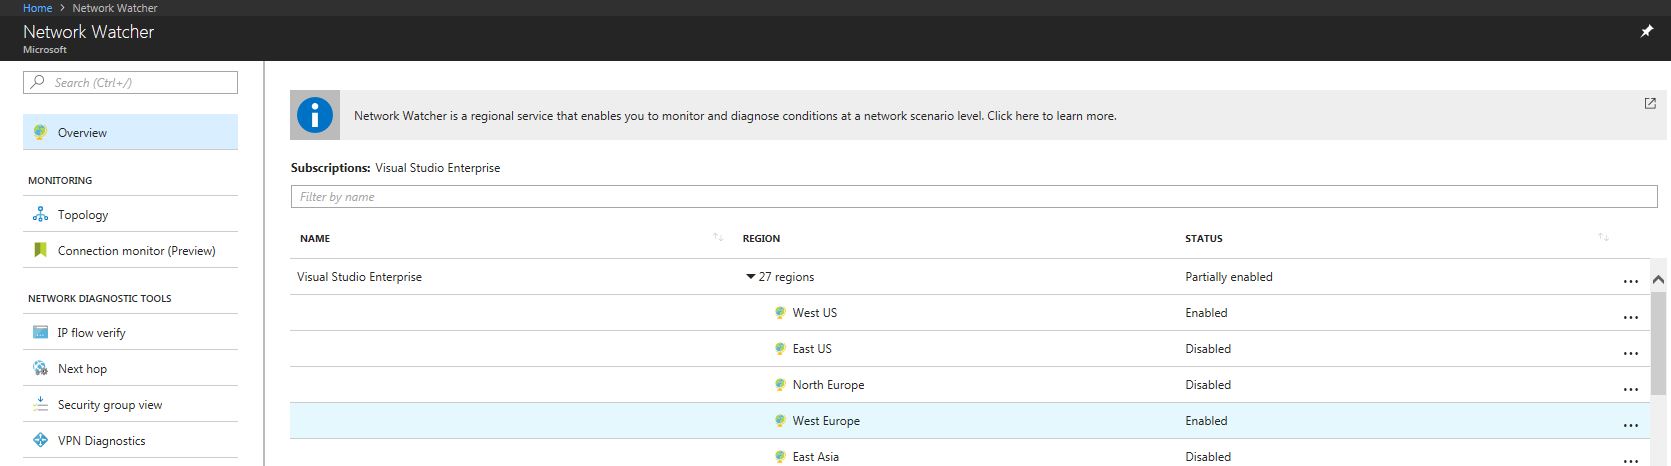 Enable Network Watchers in your desired location